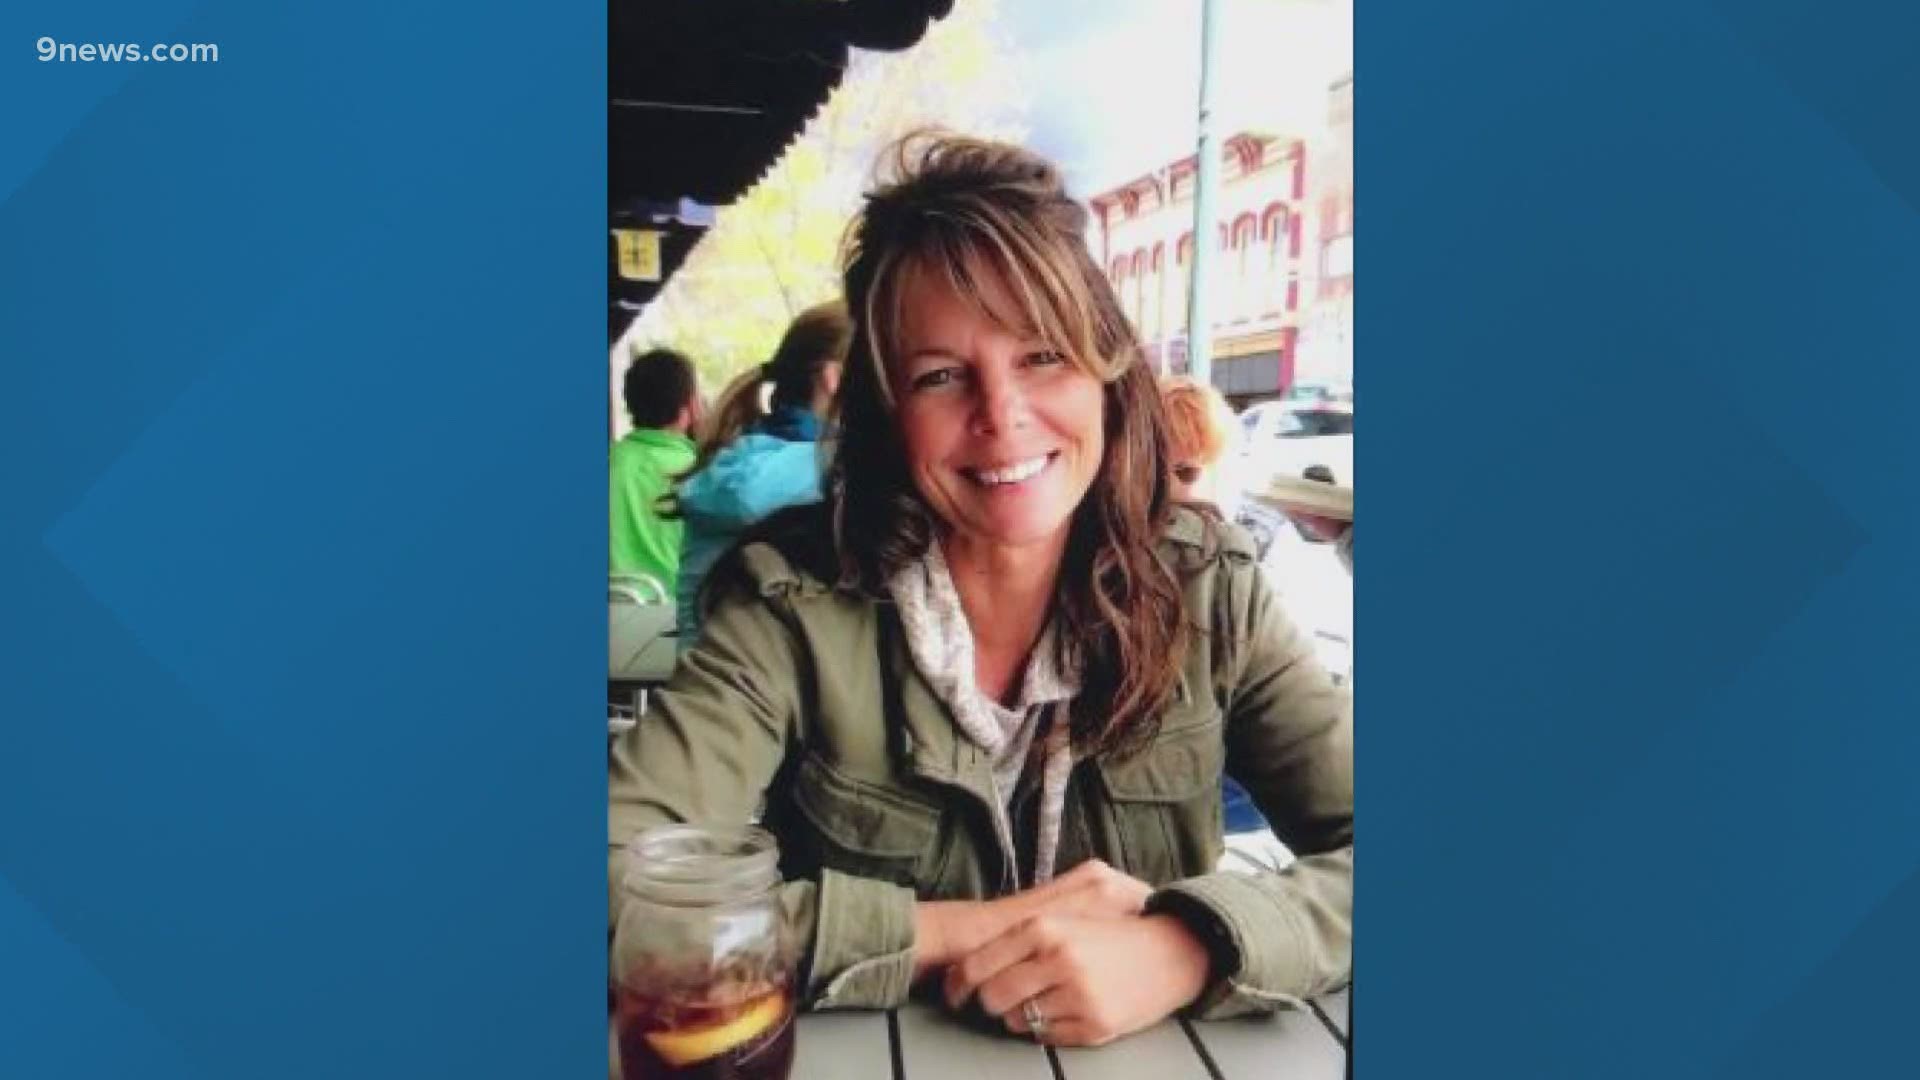 A dedicated tip line has also been set for information about  Suzanne Morphew who was last seen Sunday in Chaffee County.